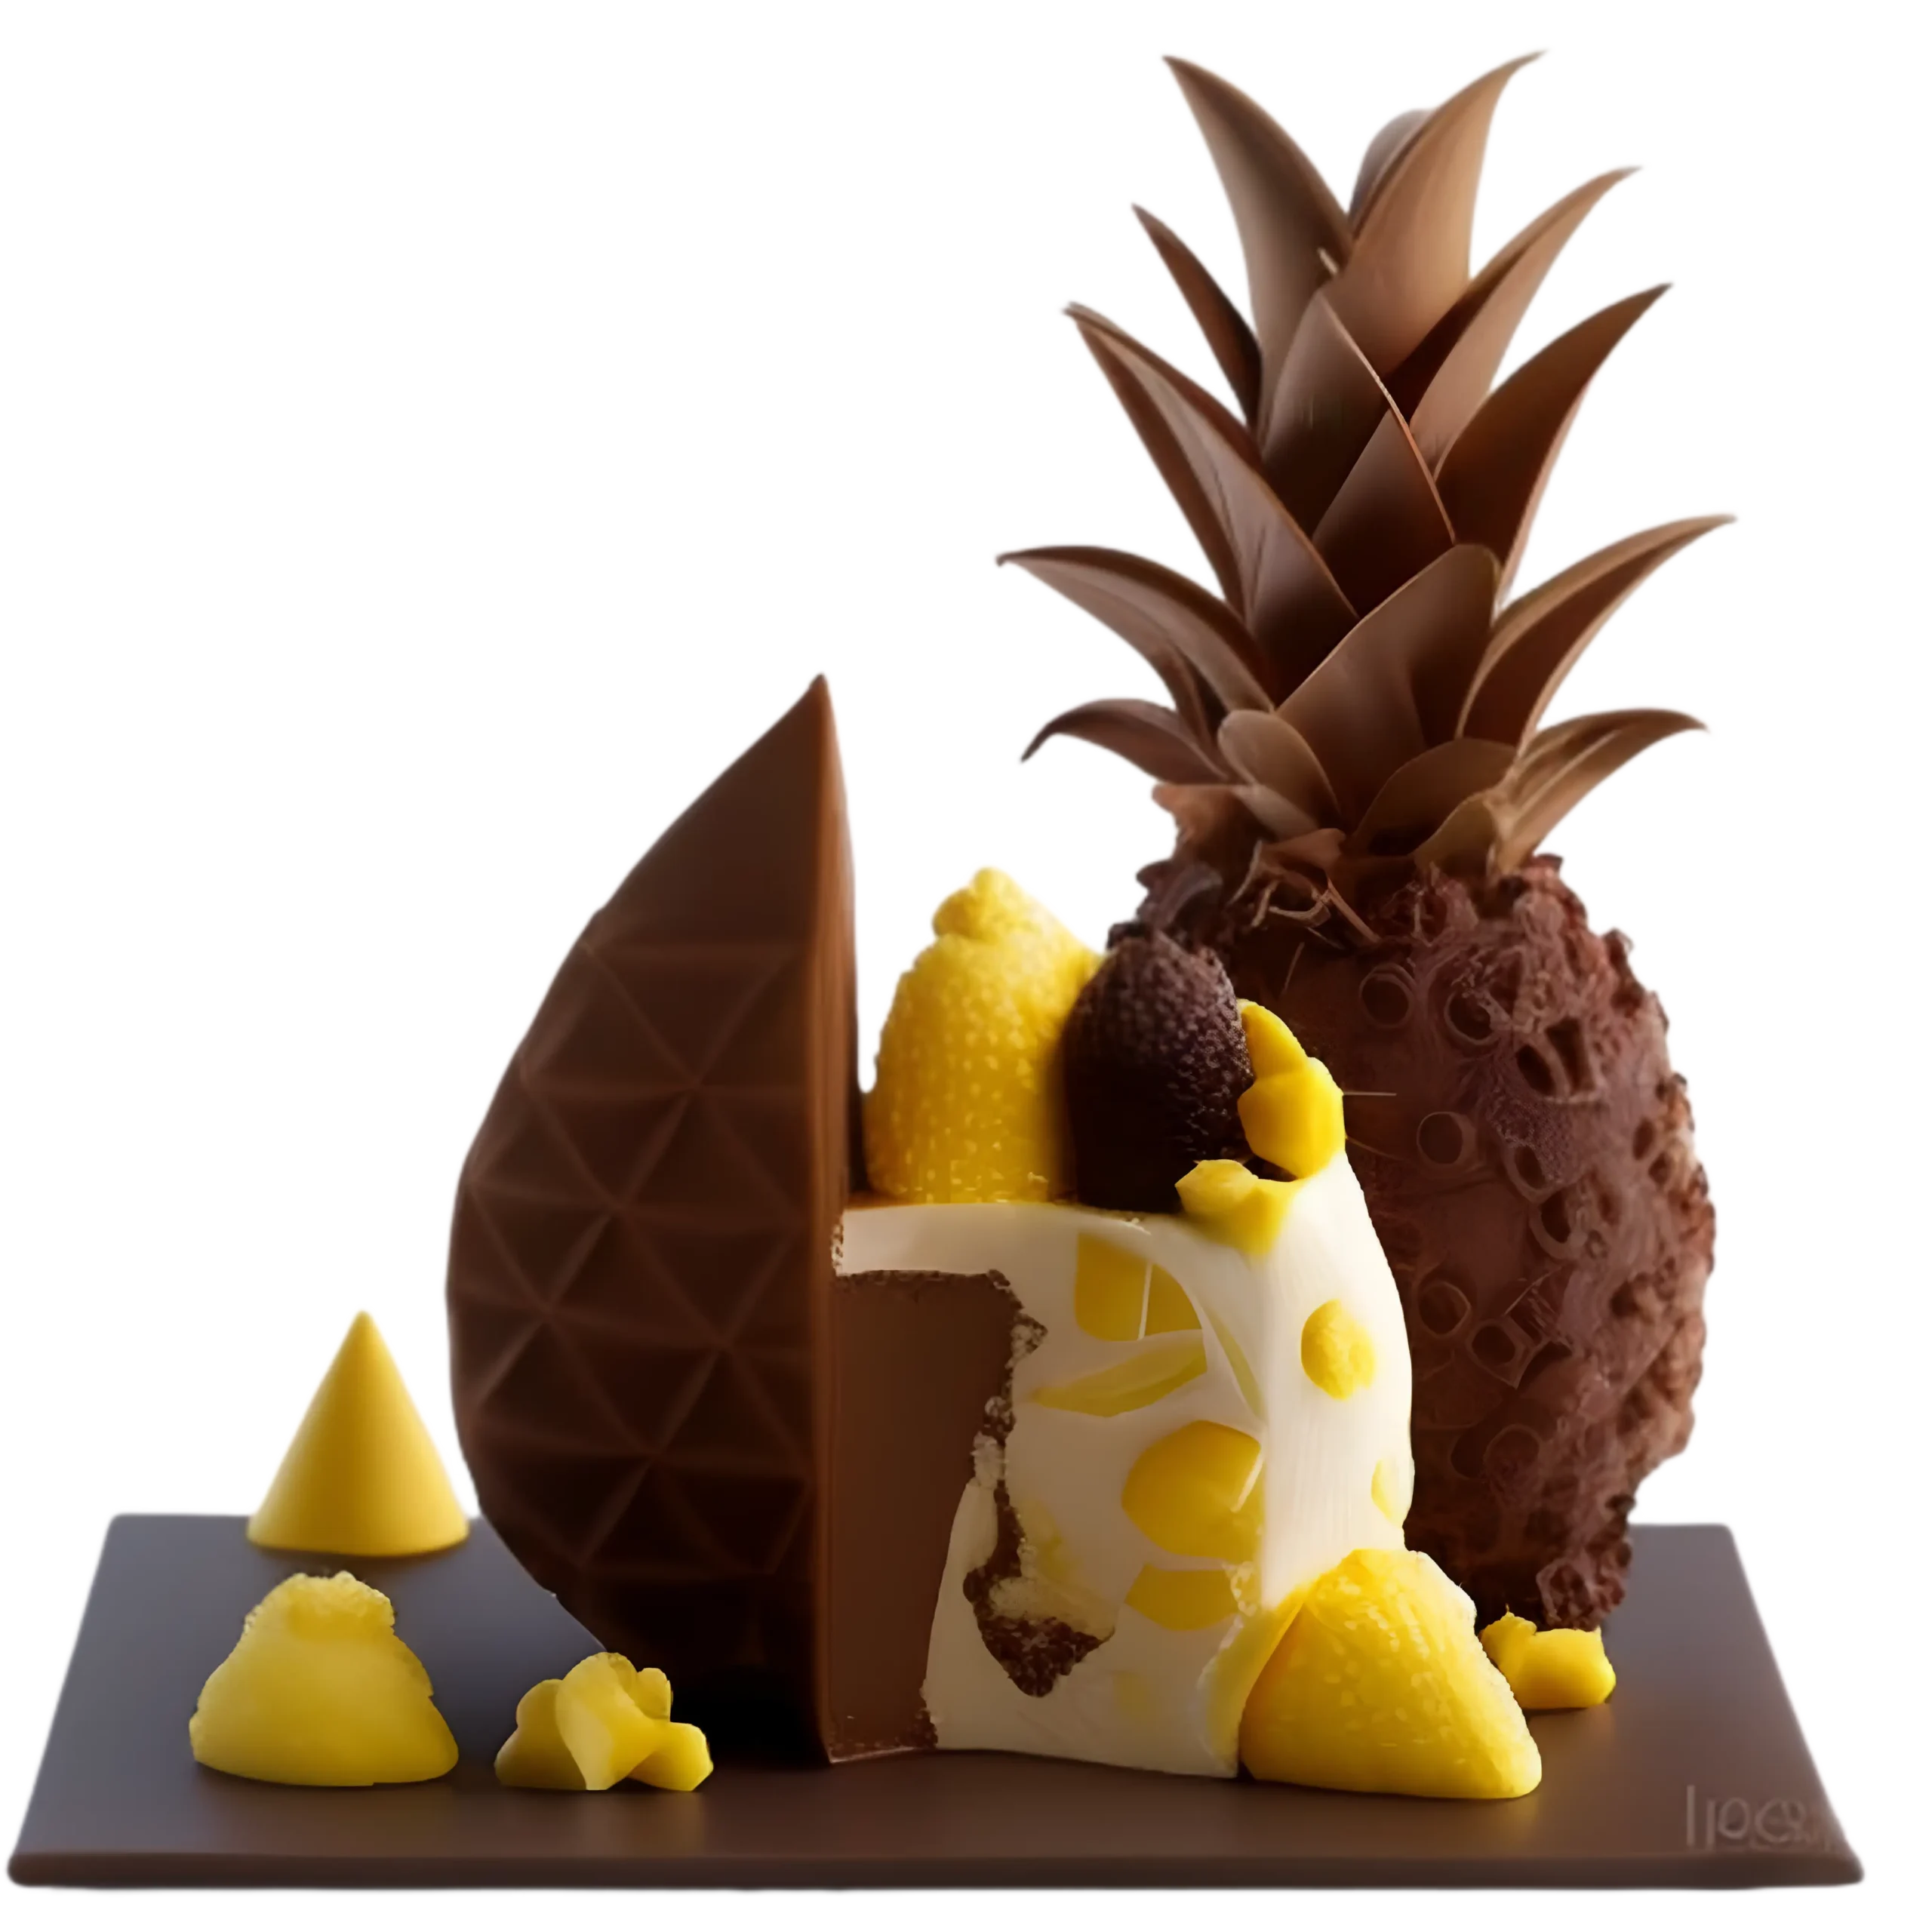 Cartoon Pineapple Cake Illustration PNG Images | PSD Free Download - Pikbest